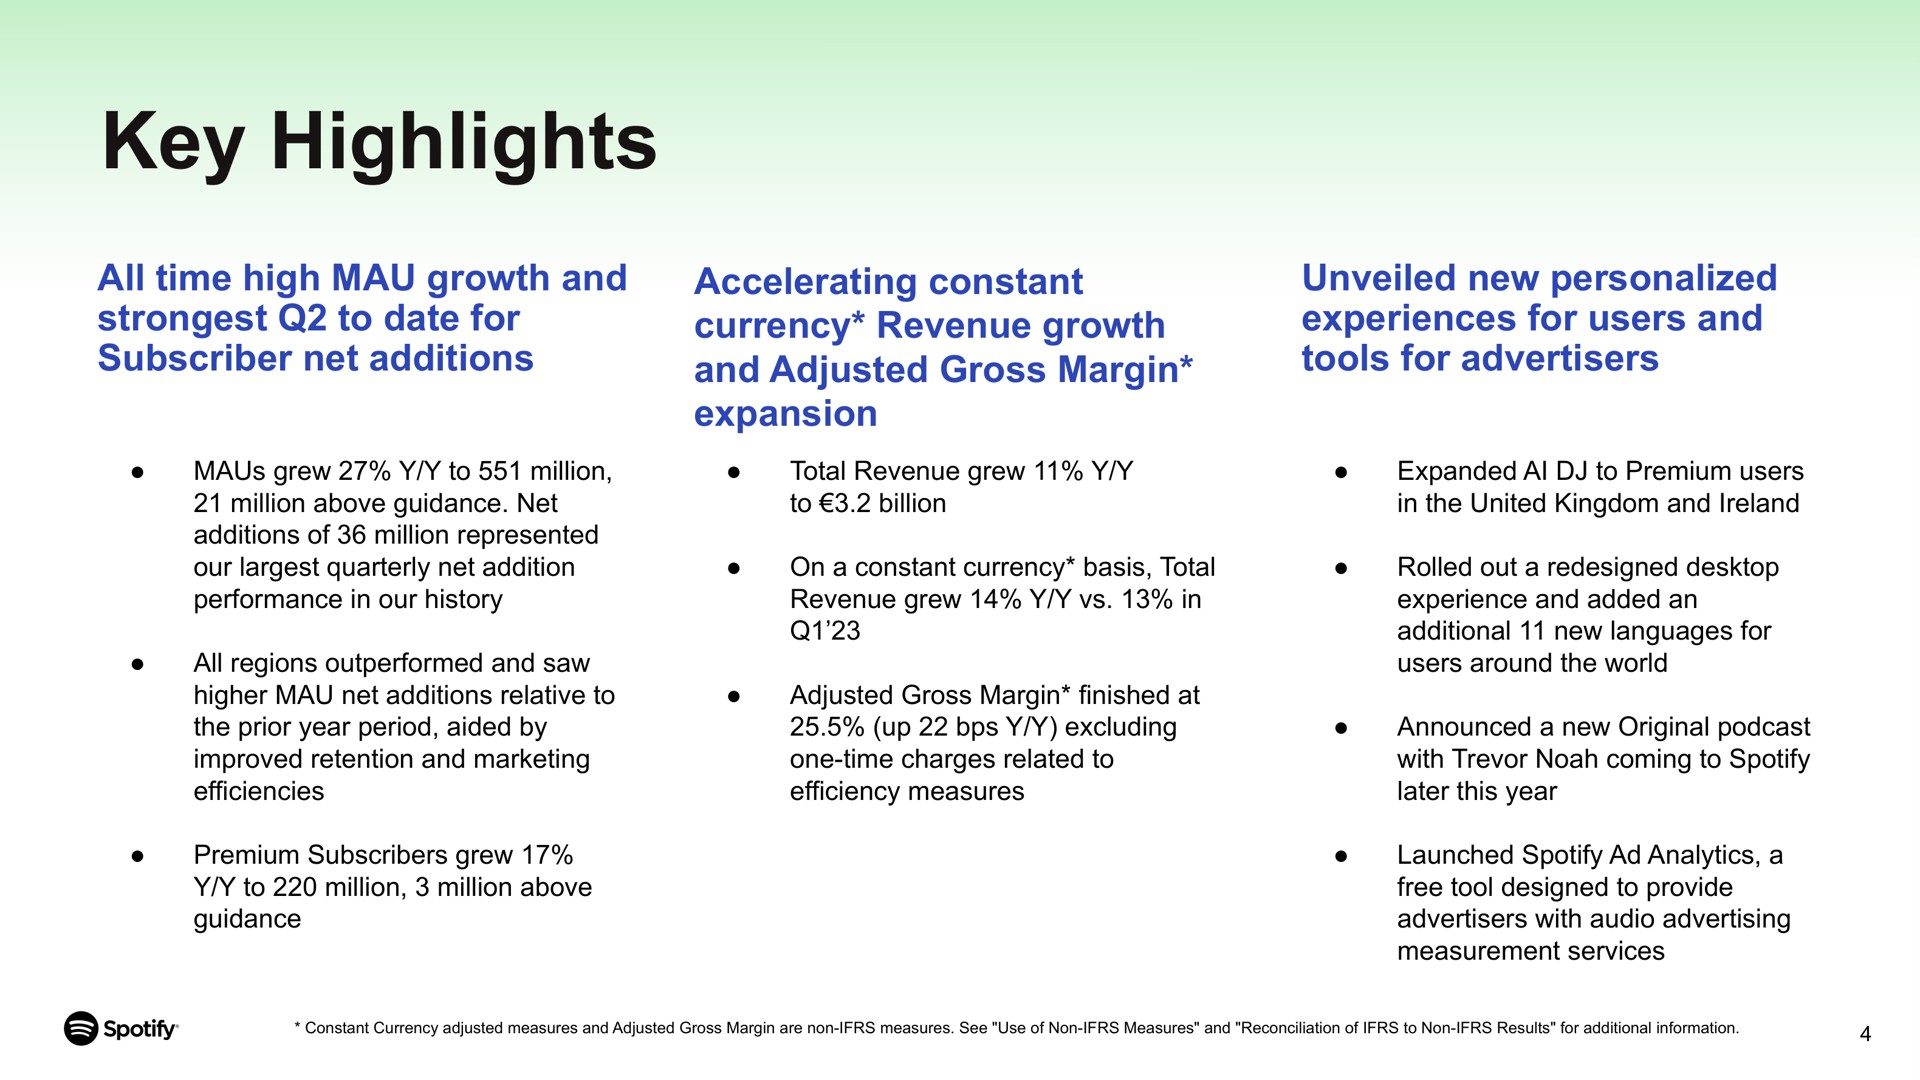 key highlights all time high mau growth and to date for subscriber net additions accelerating constant currency revenue growth and adjusted gross margin expansion unveiled new personalized experiences for users and tools for advertisers the prior year period aided by efficiencies billion with audio advertising measurement services | Spotify